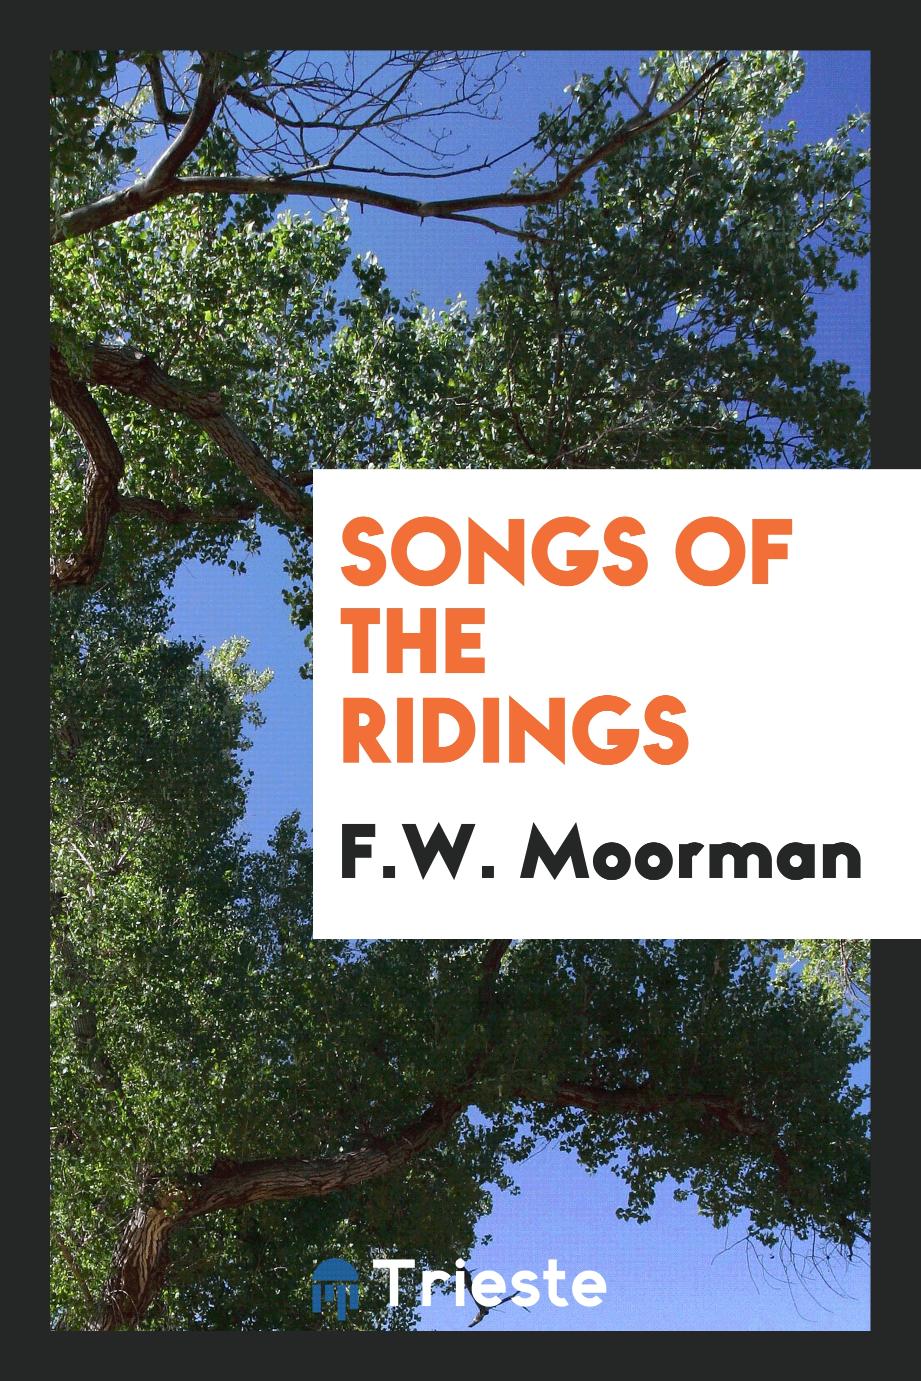 Songs of the ridings